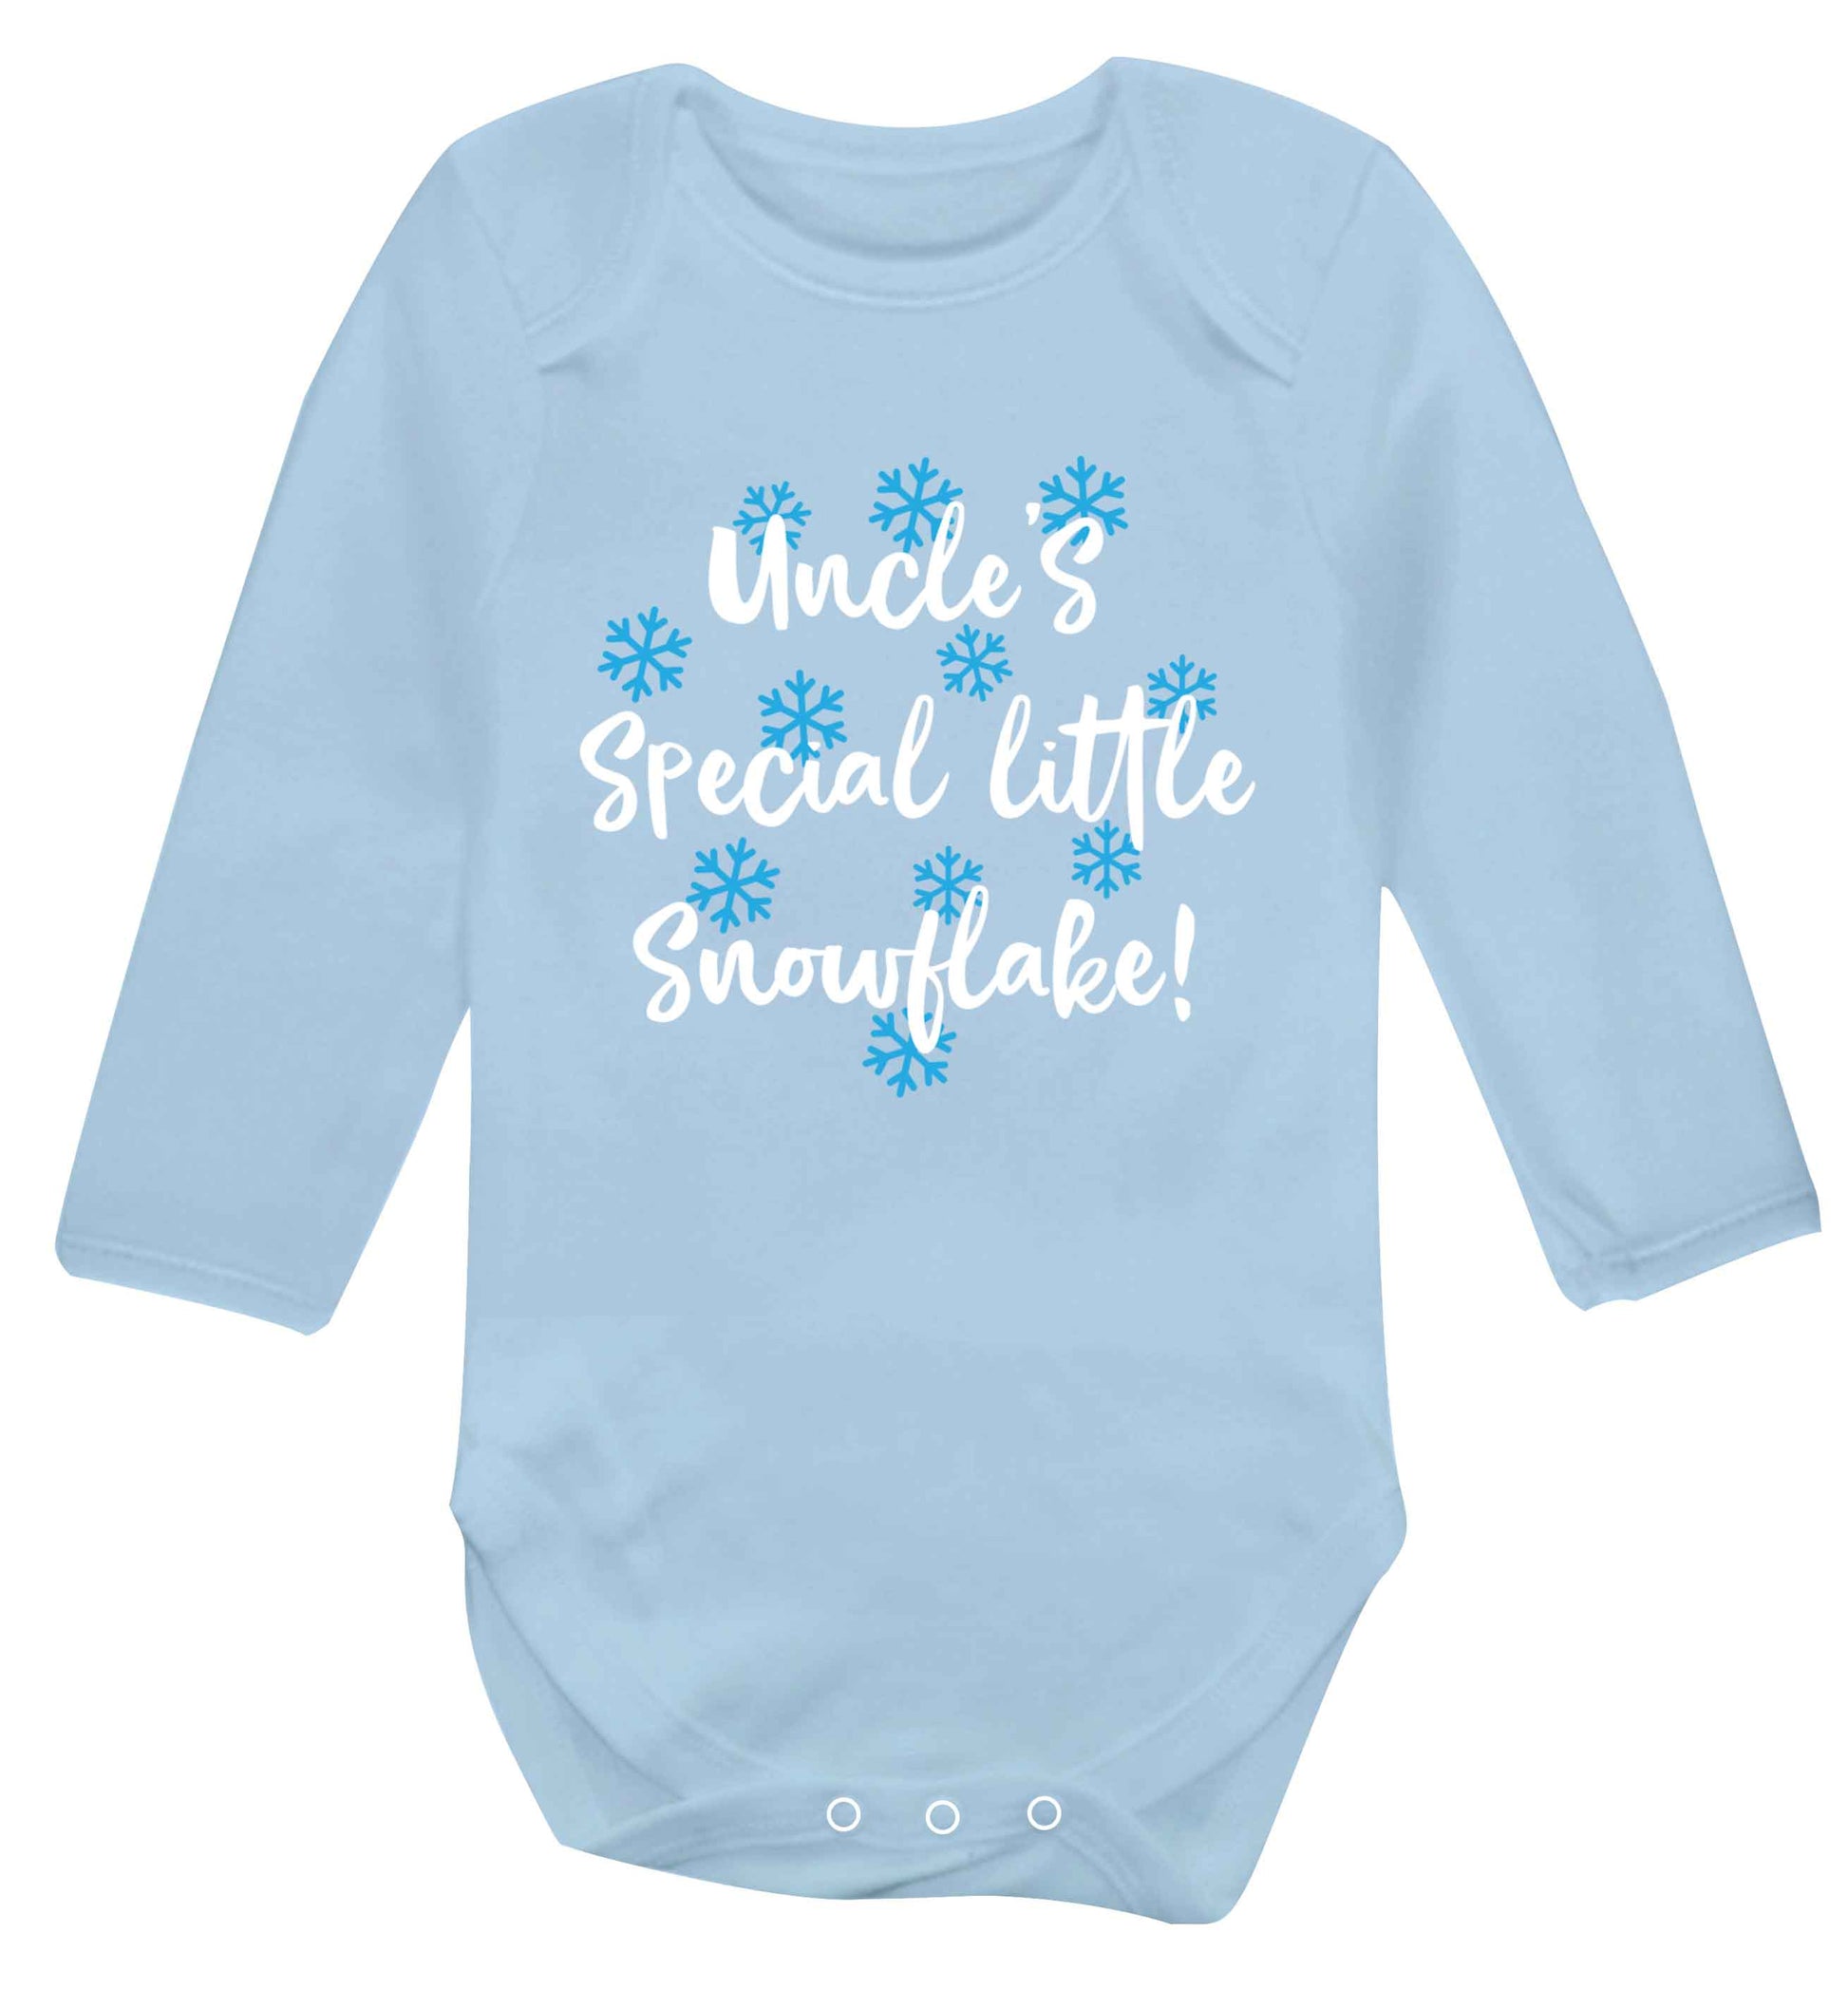 Uncle's special little snowflake Baby Vest long sleeved pale blue 6-12 months